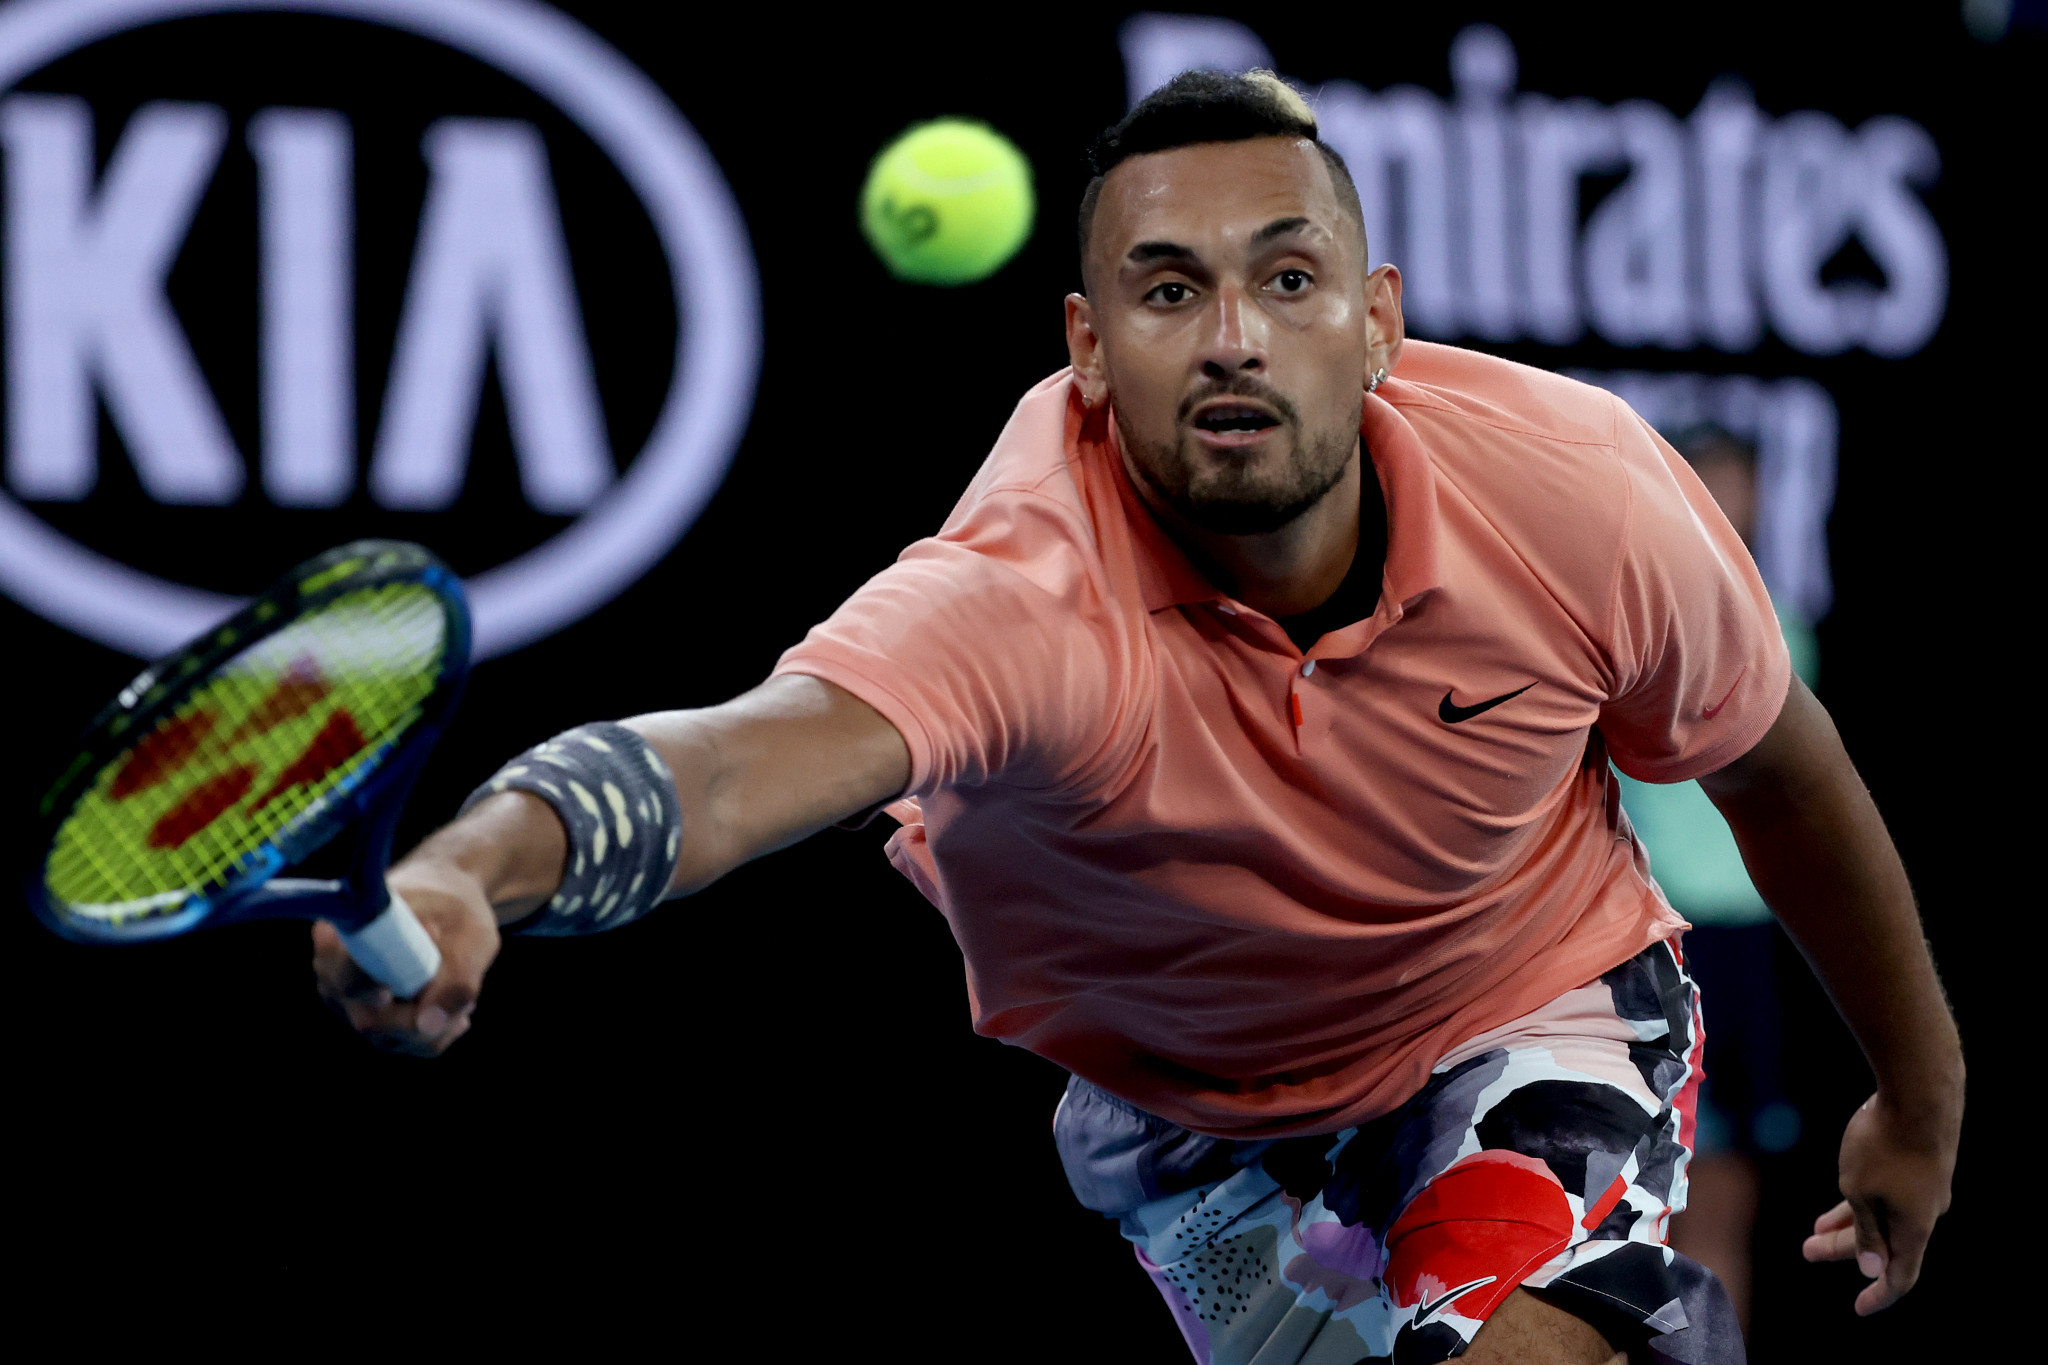 Home favourite Nick Kyrgios battled into the fourth round of the Australian Open ©Getty Images